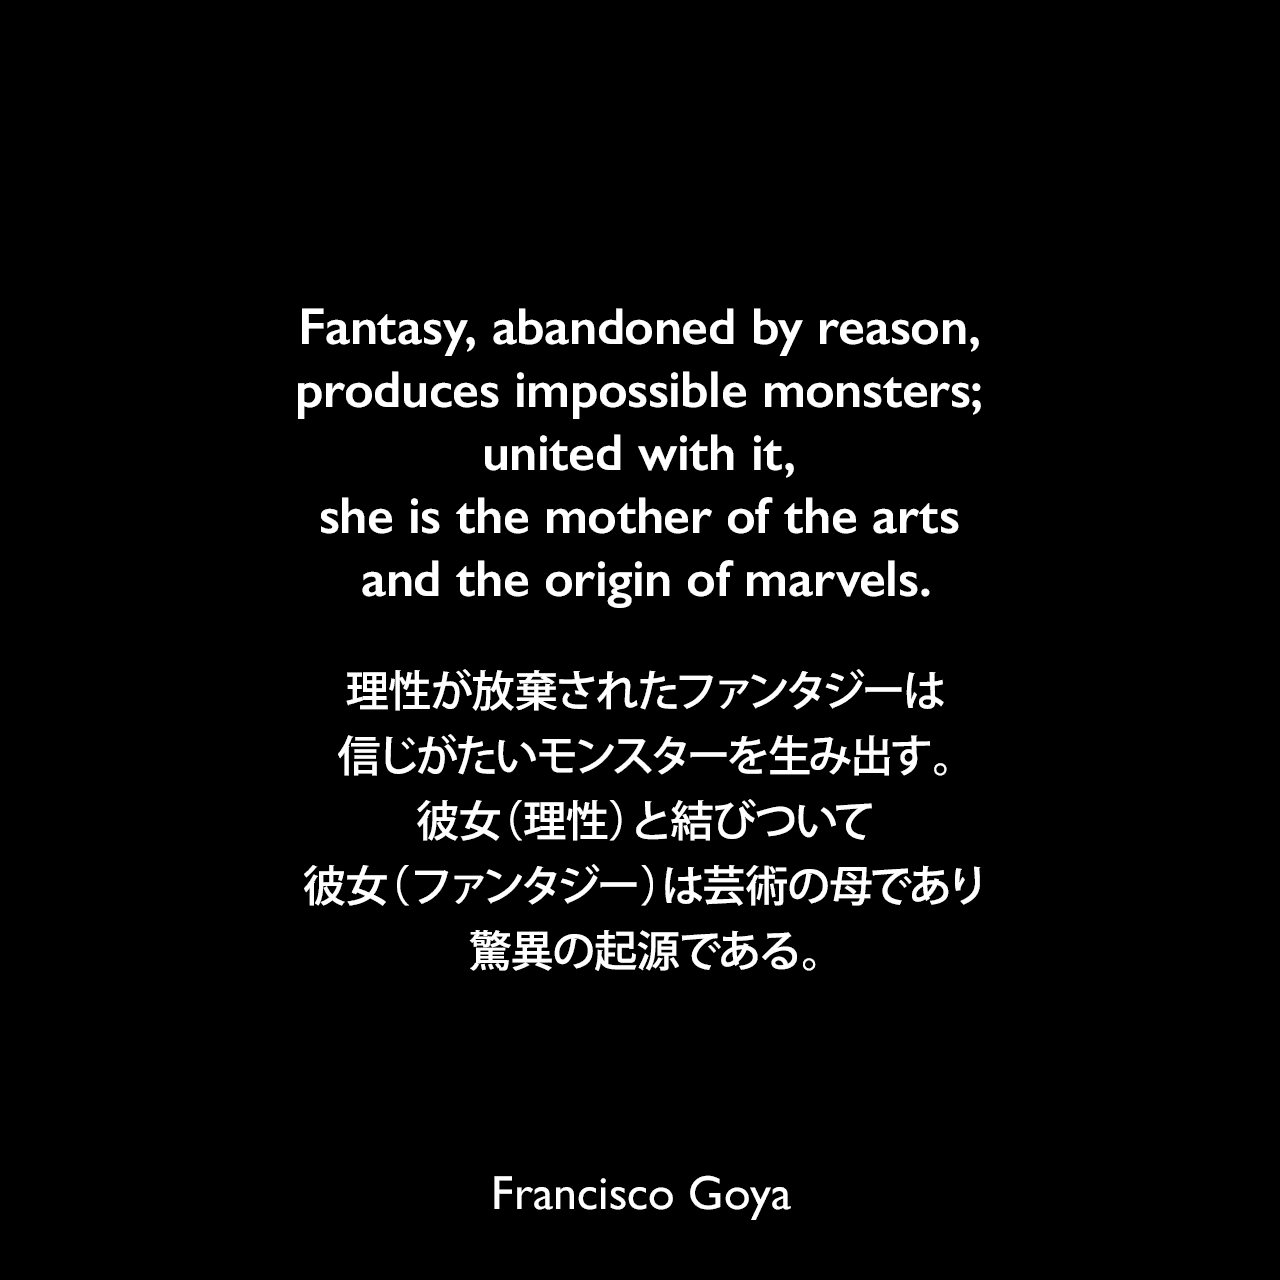 Fantasy, abandoned by reason, produces impossible monsters; united with it, she is the mother of the arts and the origin of marvels.理性が放棄されたファンタジーは信じがたいモンスターを生み出す。彼女（理性）と結びついて、彼女（ファンタジー）は芸術の母であり、驚異の起源である。Francisco Goya